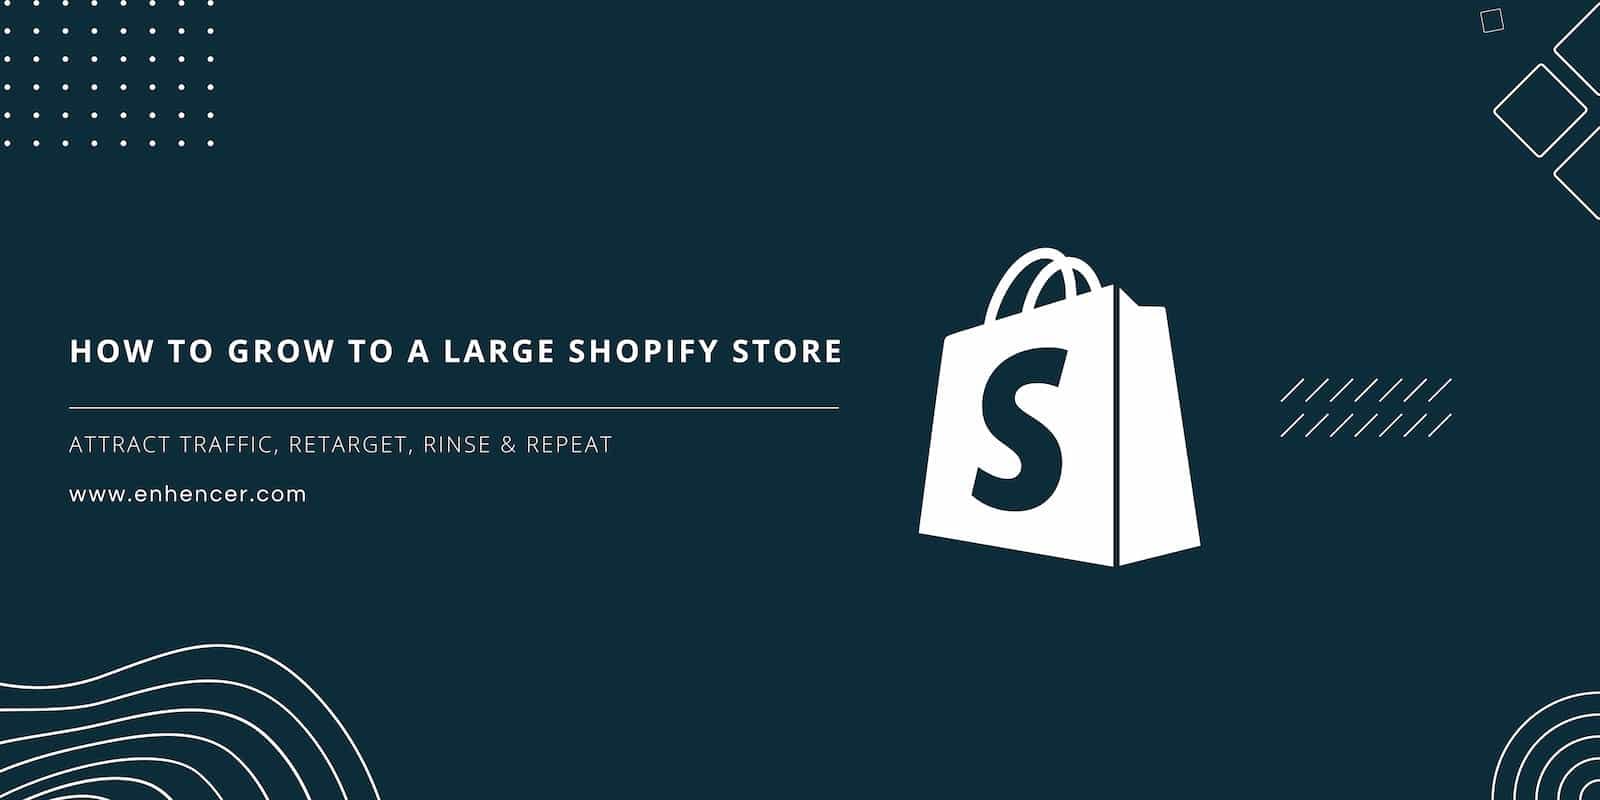 How to Grow to a Large Shopify Store